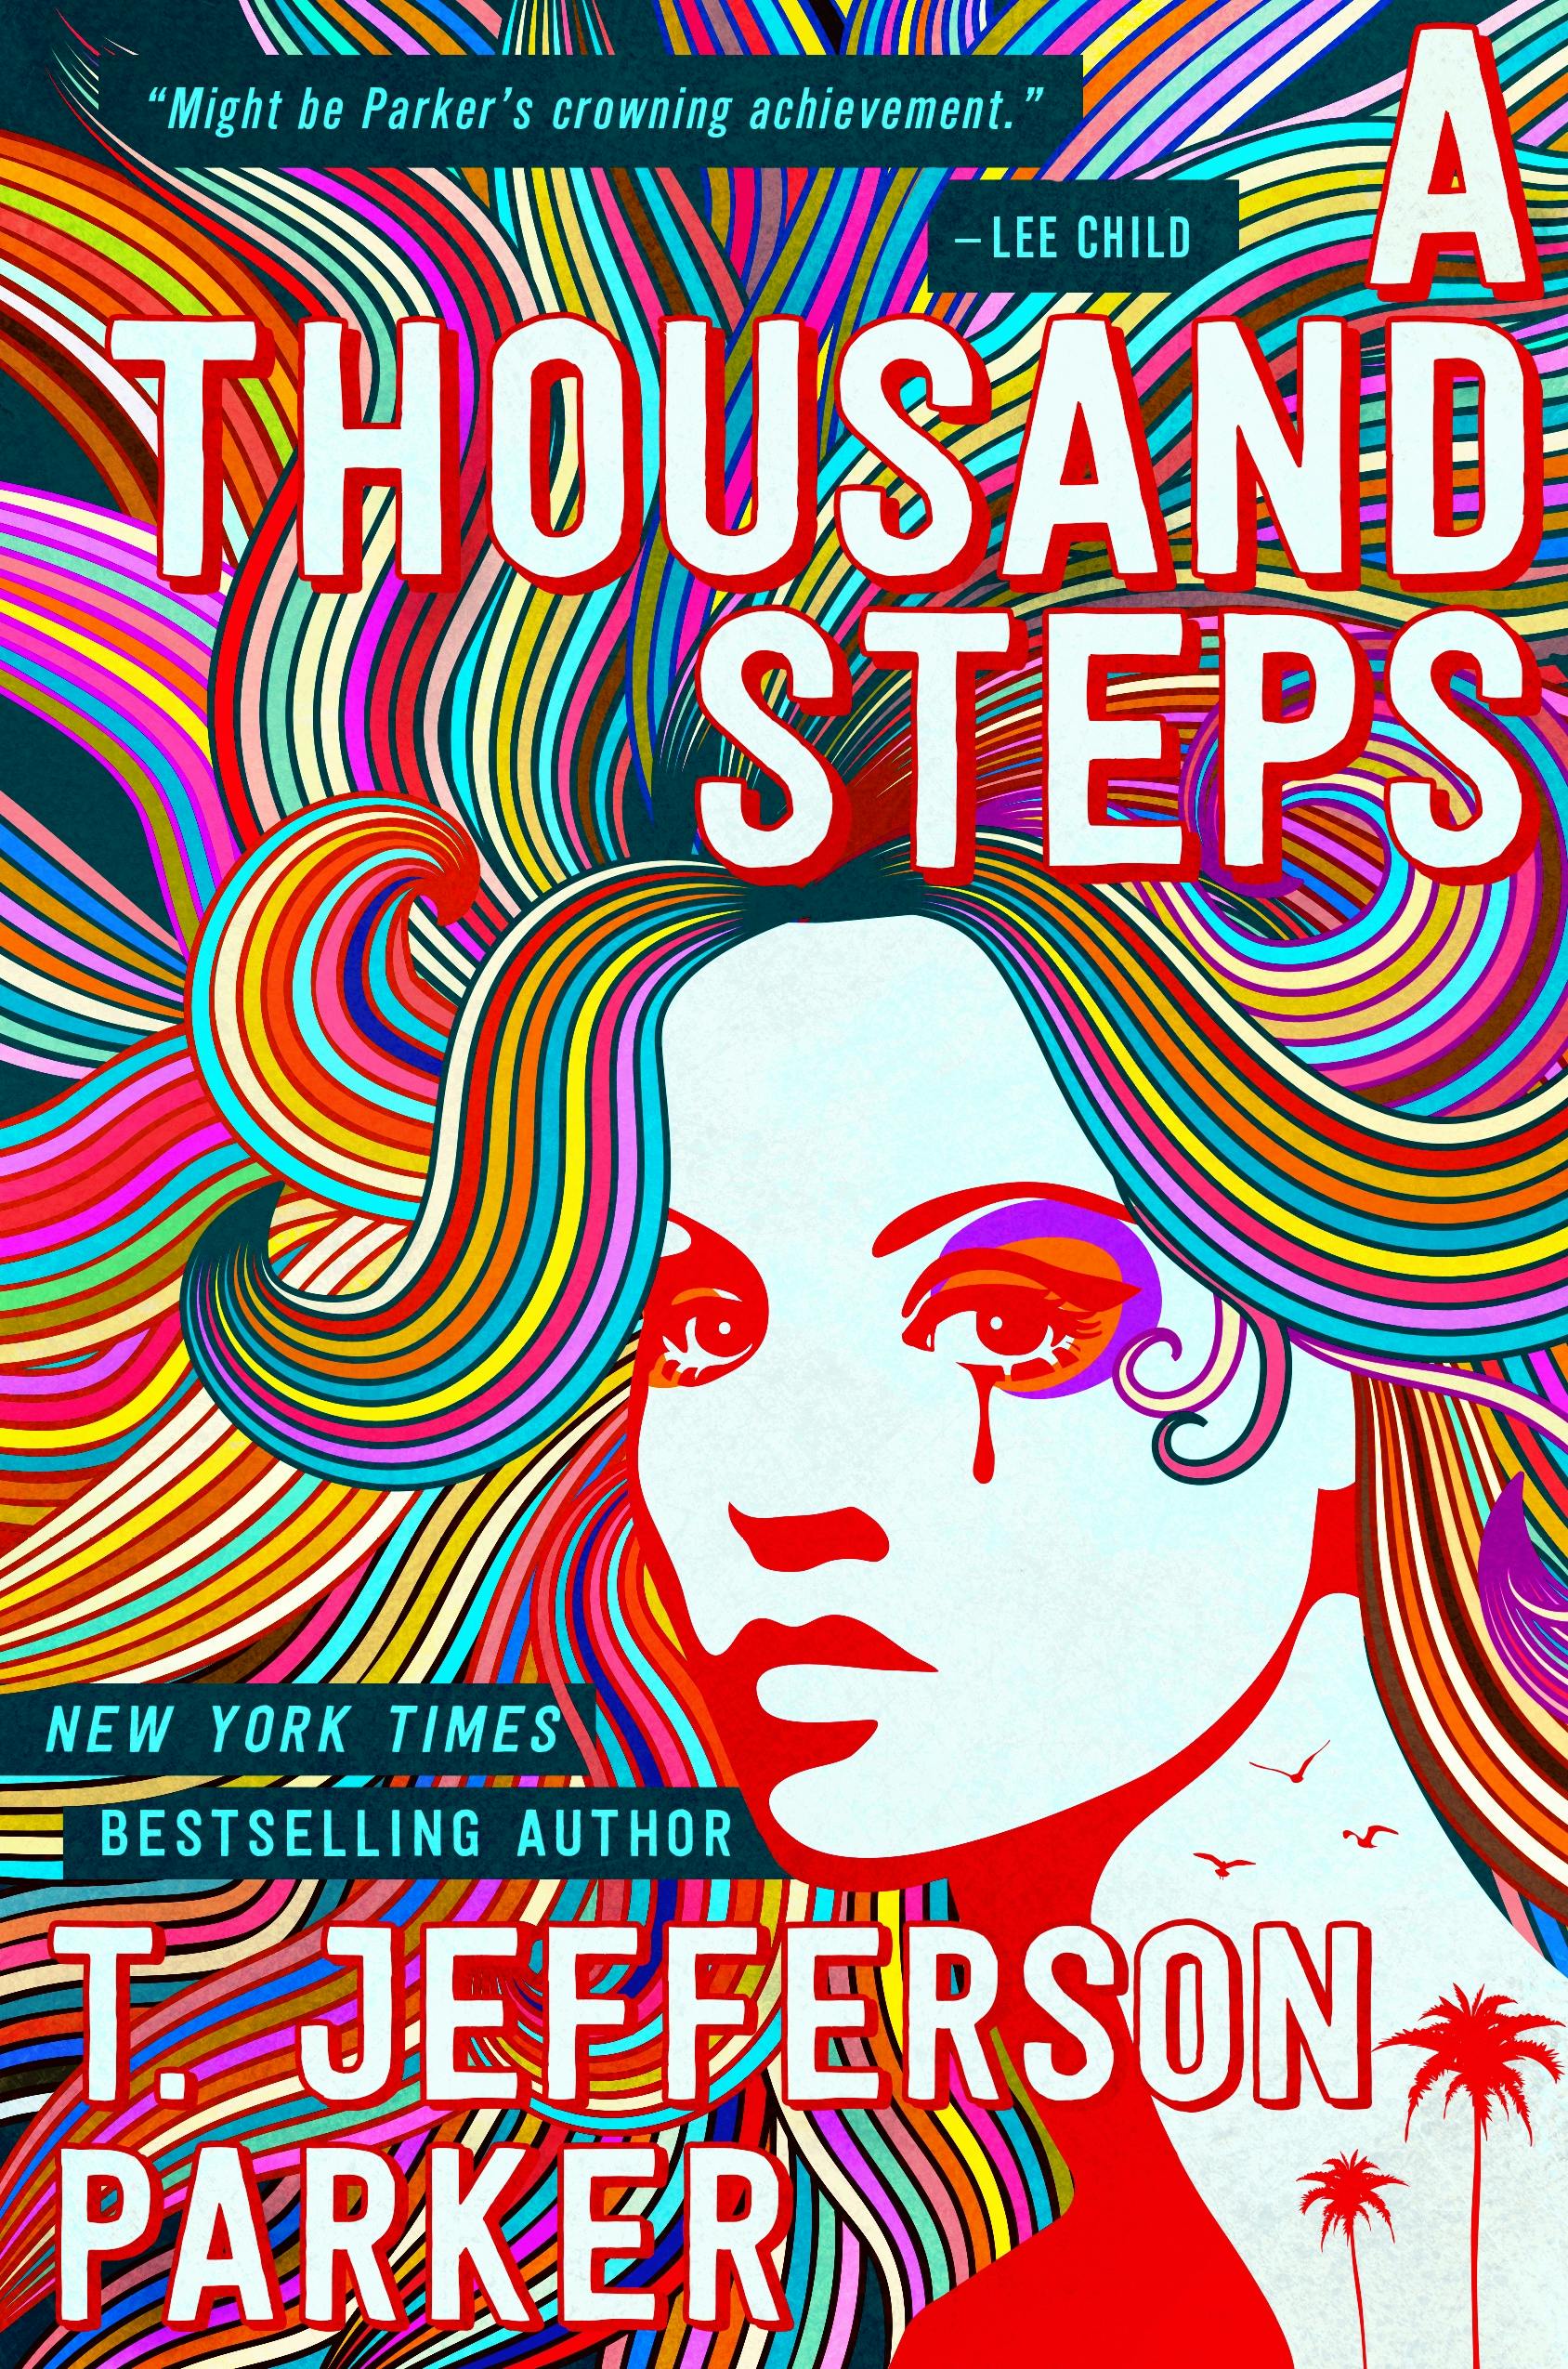 Cover for the book titled as: A Thousand Steps